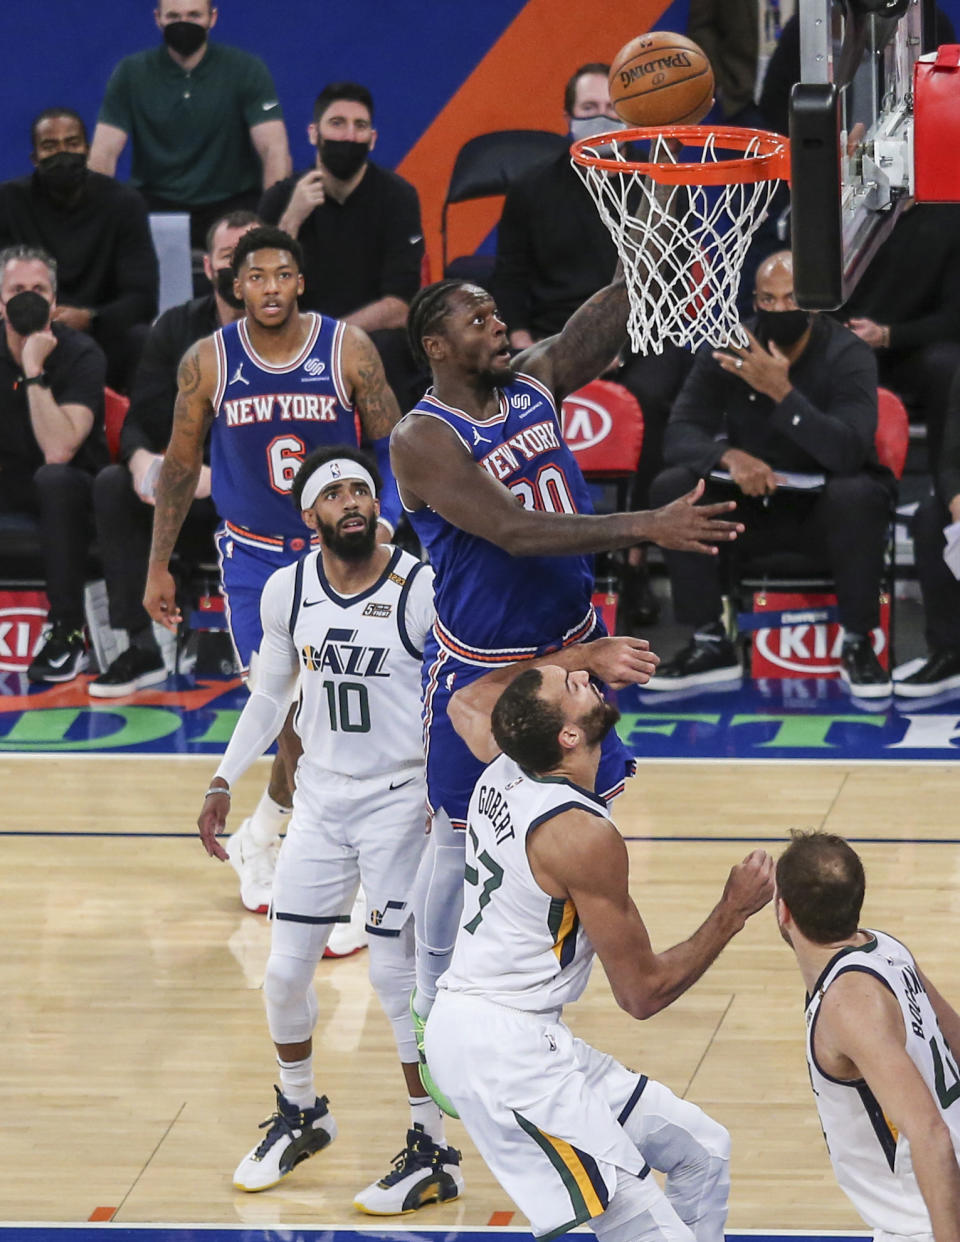 New York Knicks forward Julius Randle (30) drives to the basket against the Utah Jazz during the second quarter of an NBA basketball game Wednesday, Jan. 6, 2021, in New York. (Wendell Cruz/Pool Photo via AP)